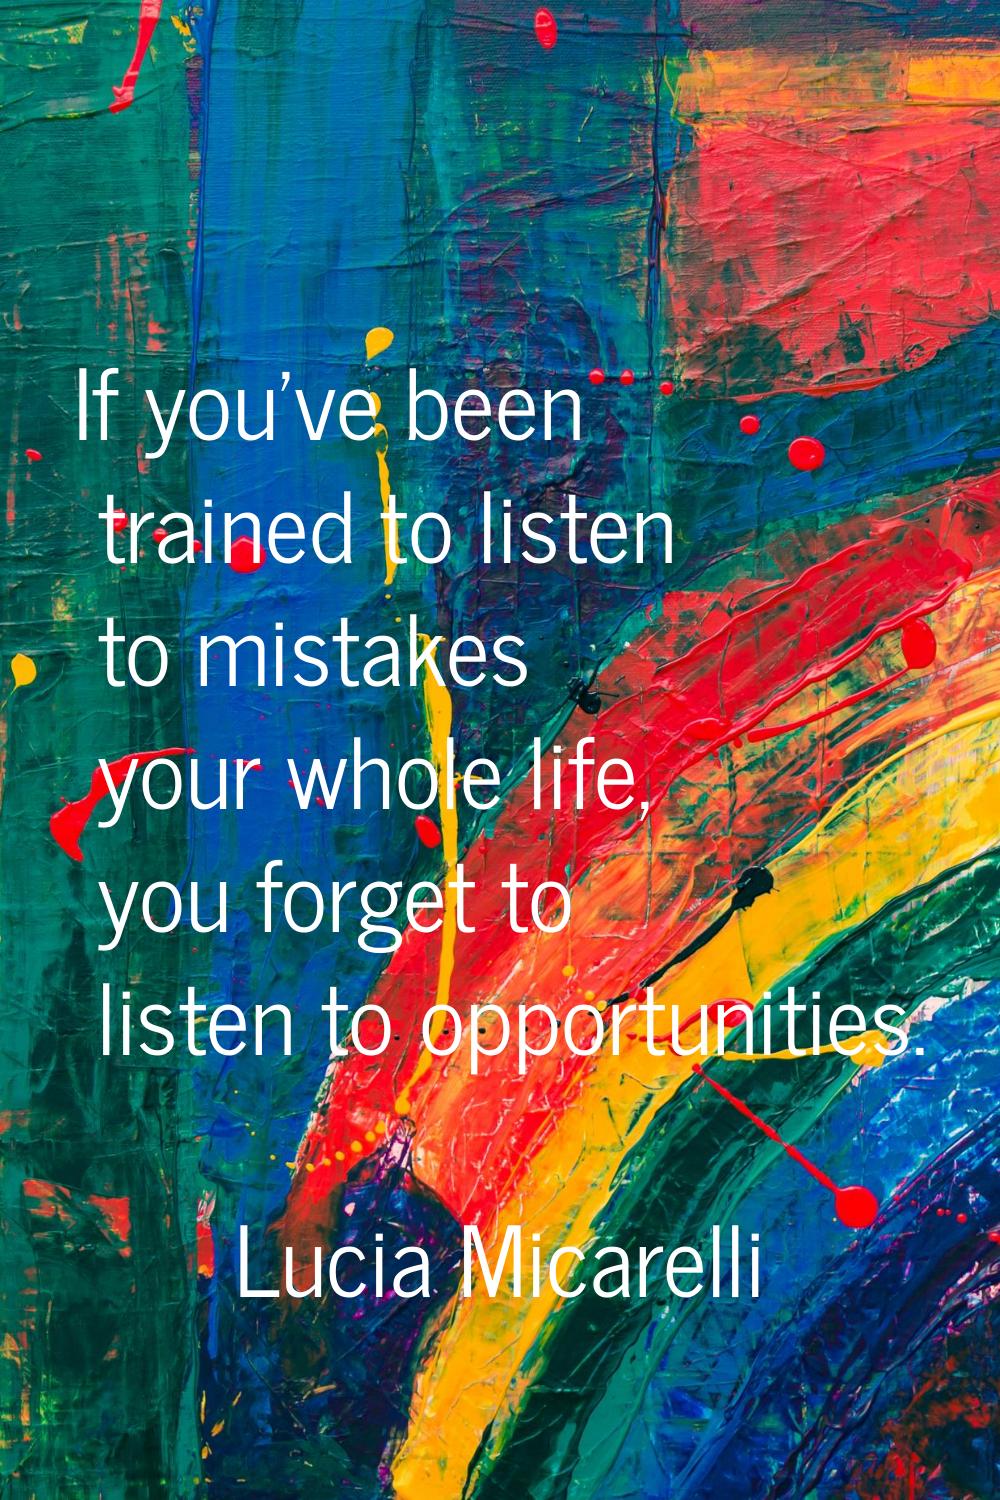 If you've been trained to listen to mistakes your whole life, you forget to listen to opportunities